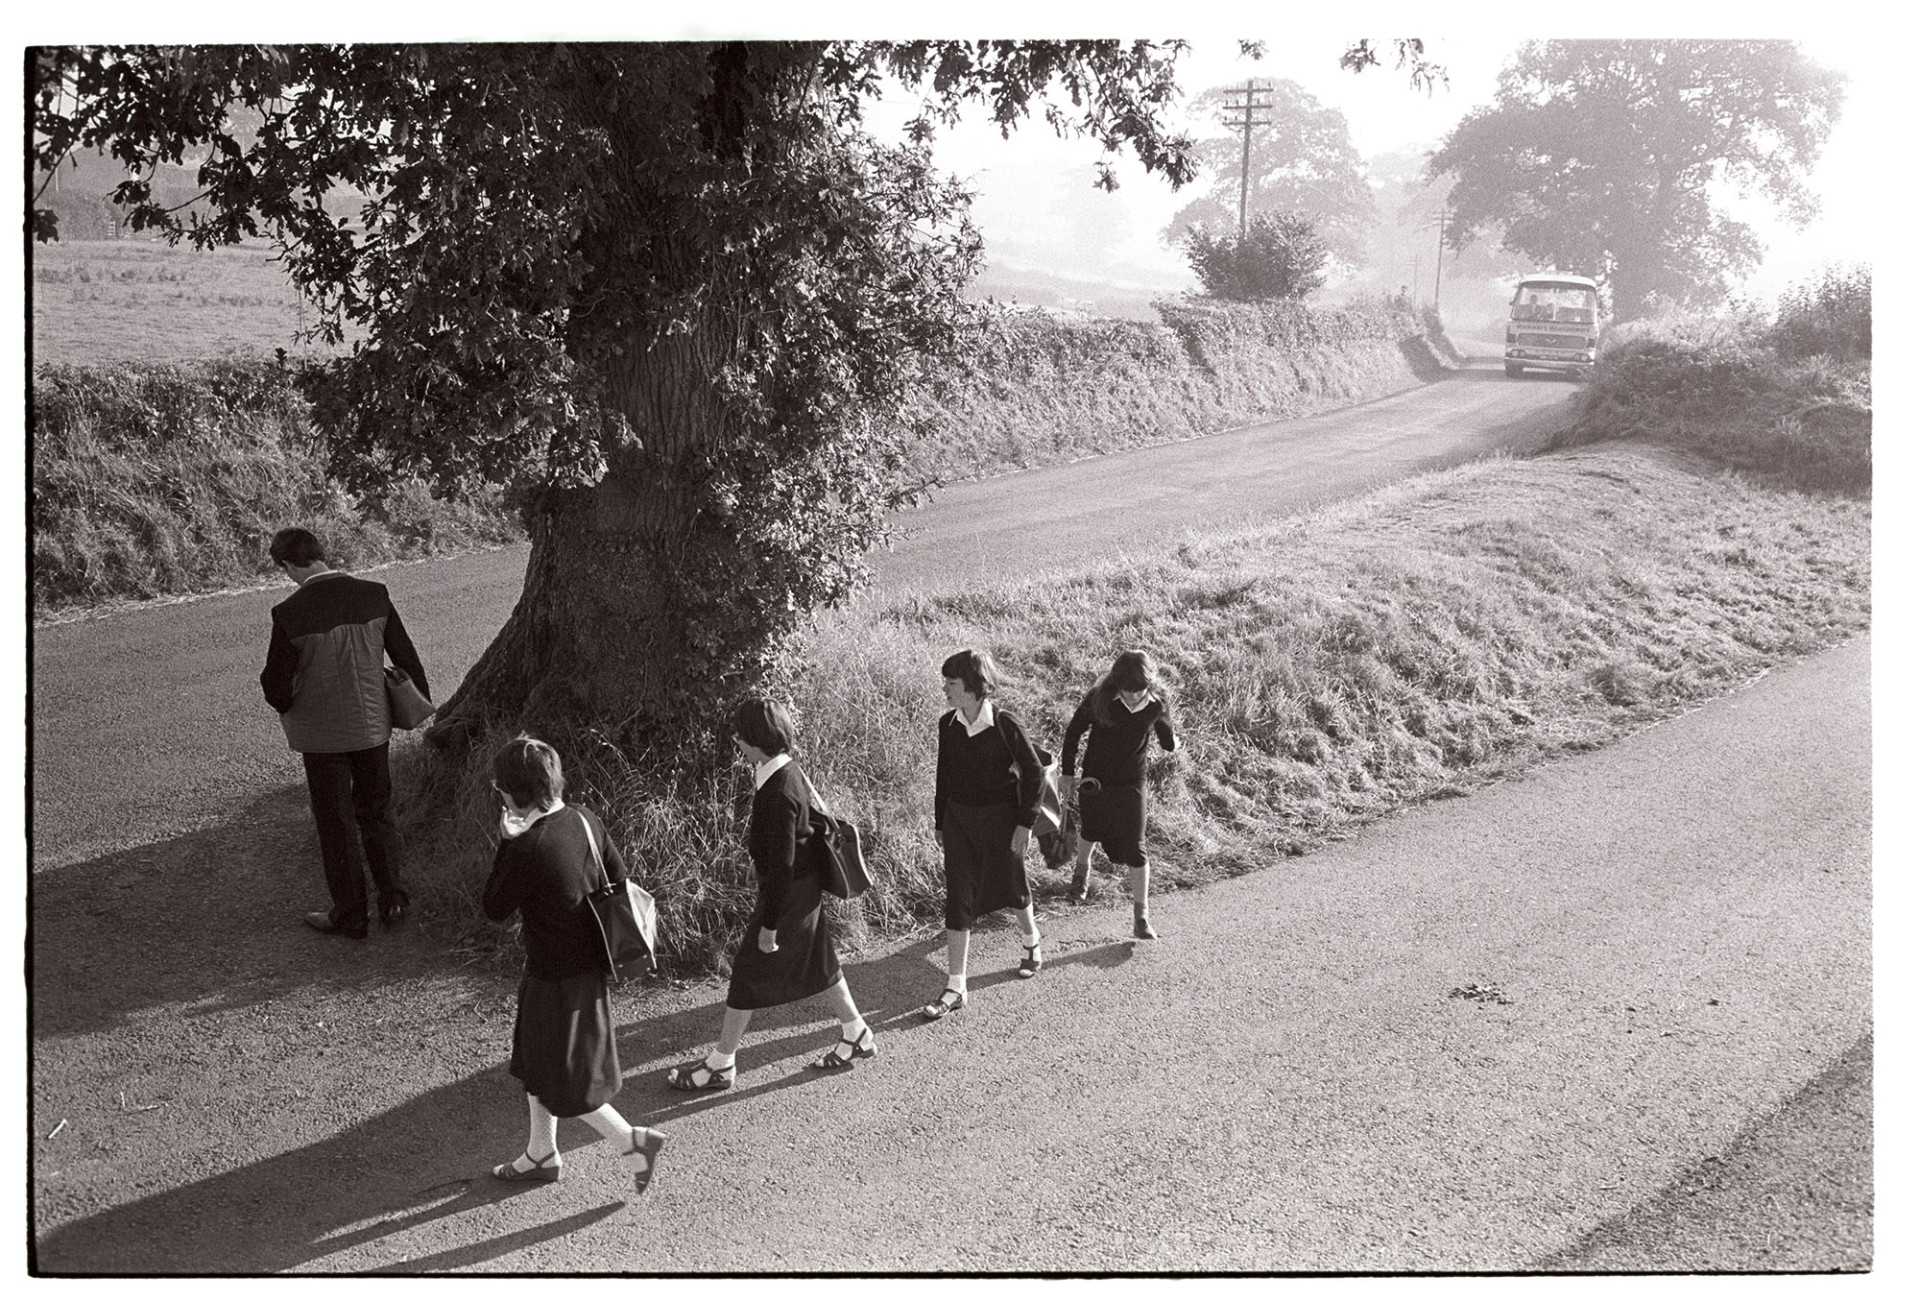 Children waiting for school bus, under oak tree, morning. Wearing uniform, bus in road. 
[Schoolchildren waiting for their school bus by an oak tree at Lovistone, Merton. The bus is approaching and they are all wearing school uniforms.]